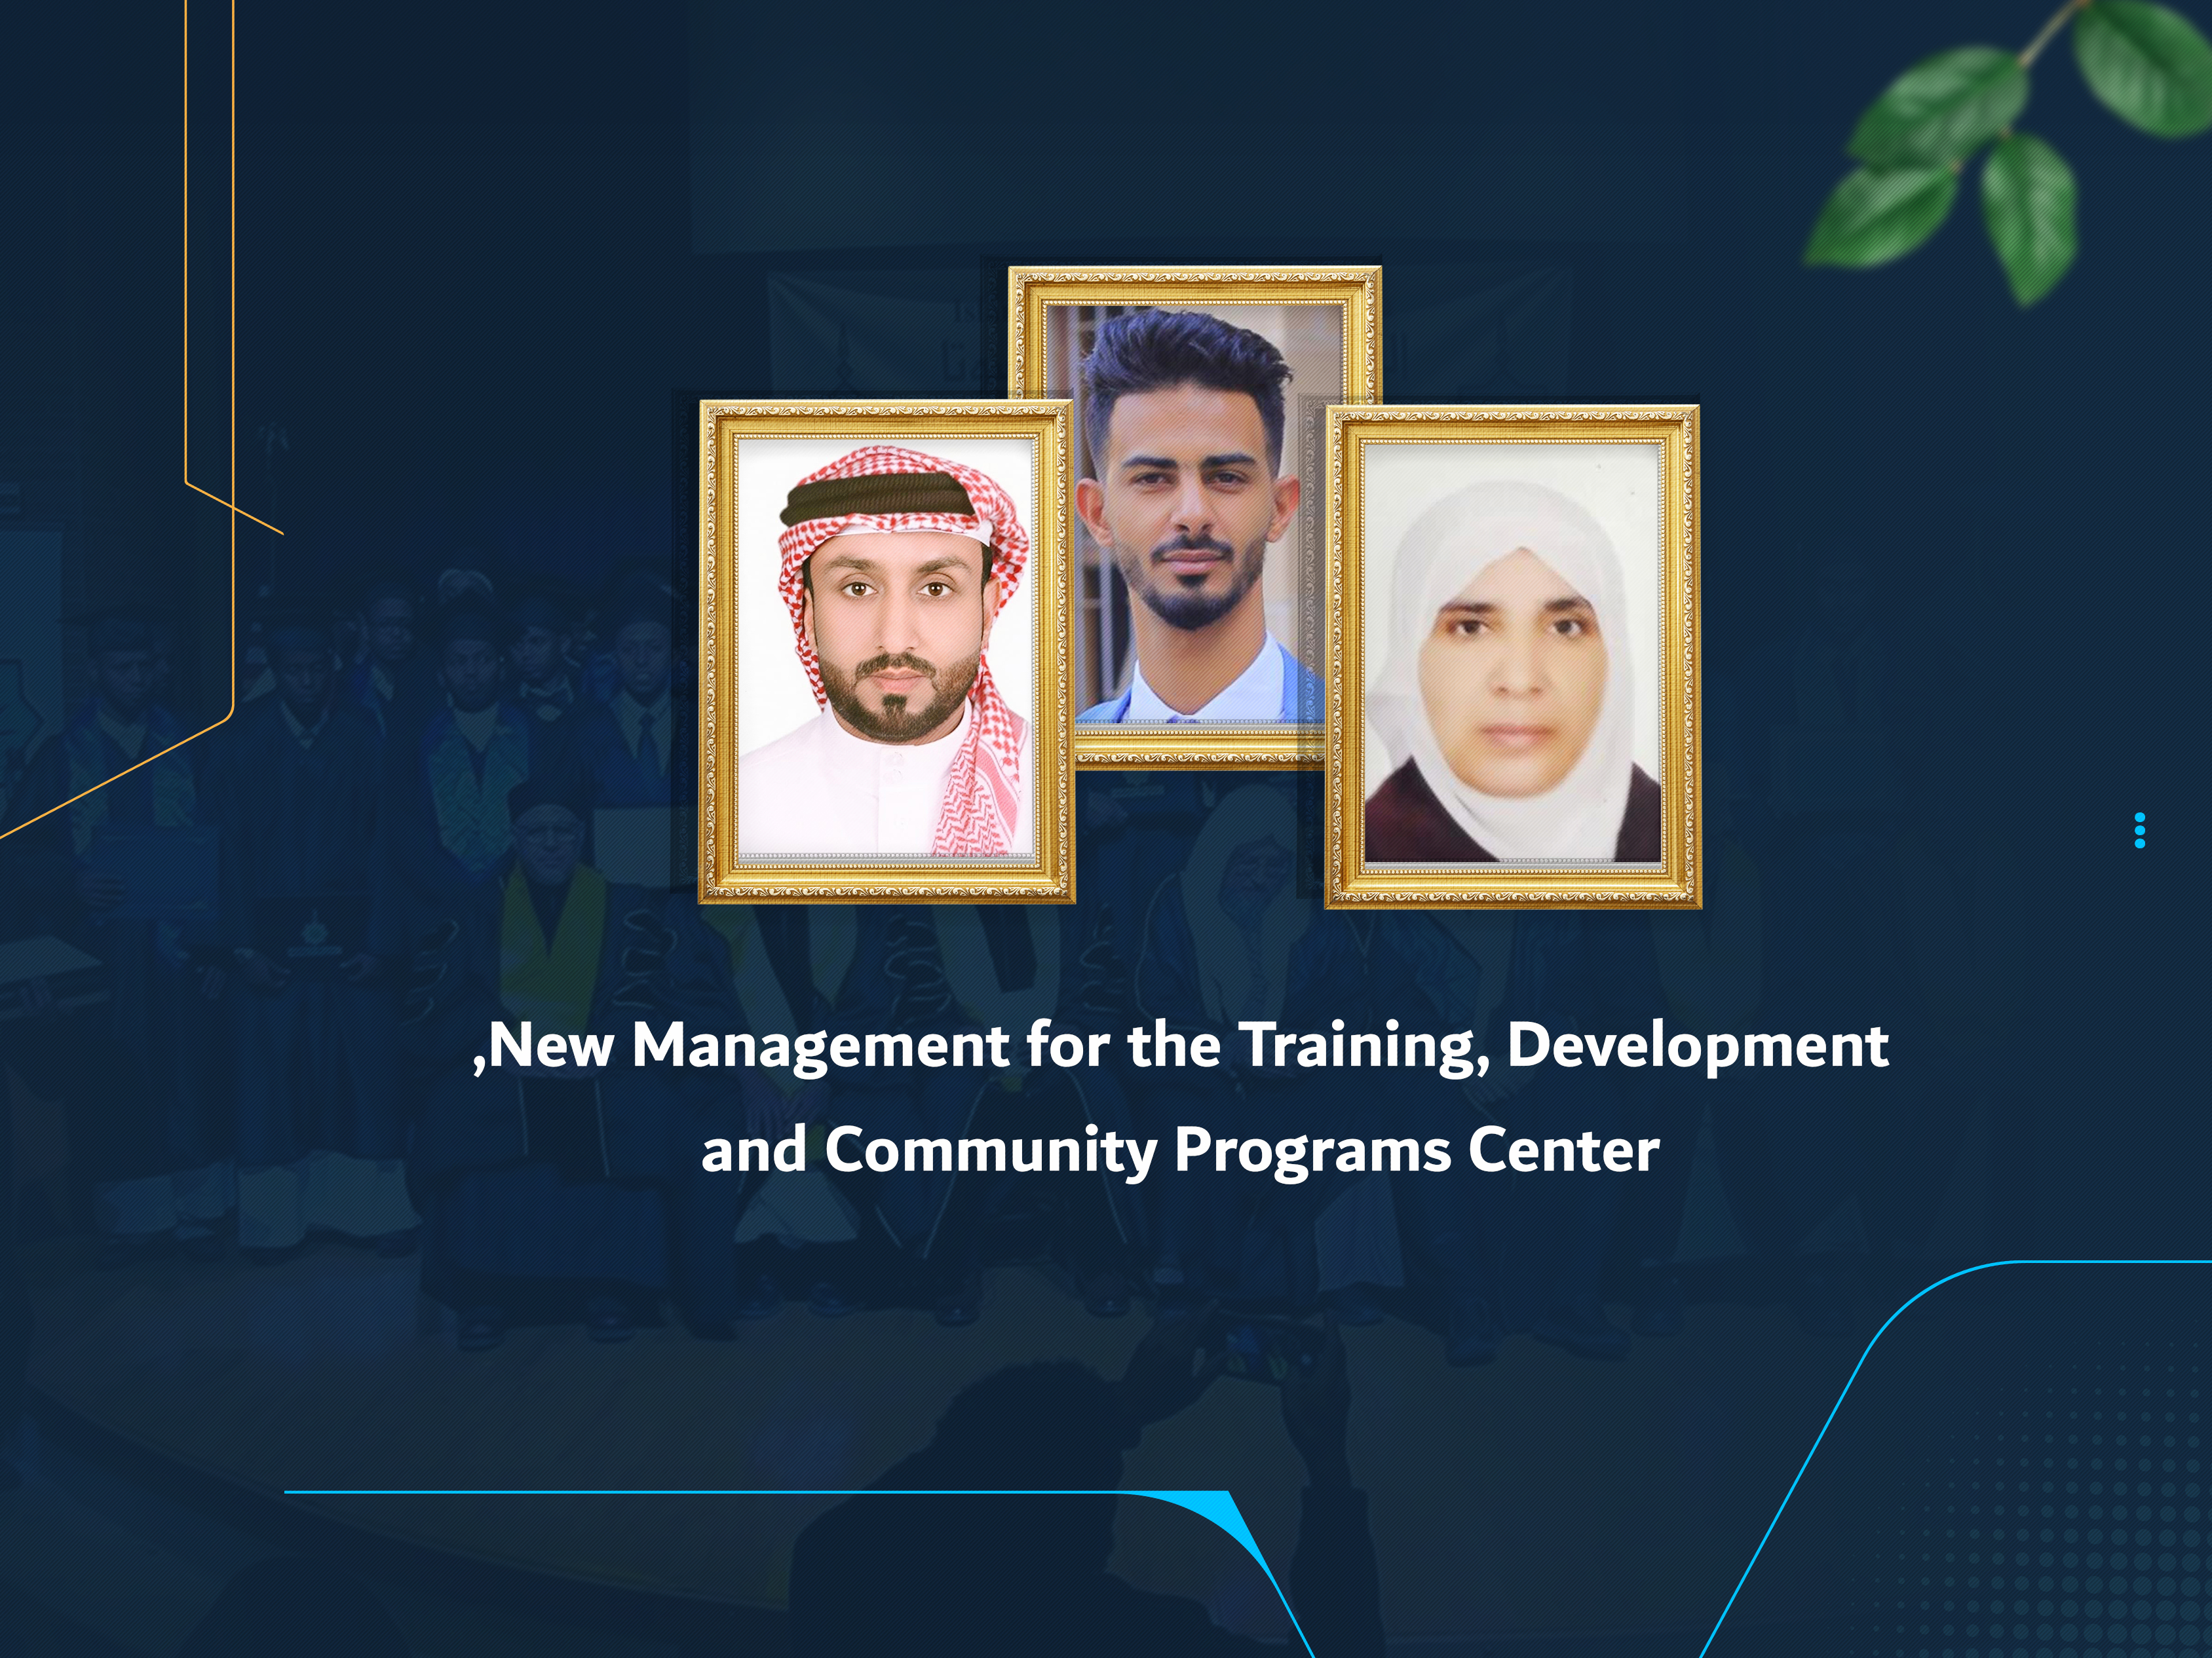 New Management for the Training, Development, and Community Programs Center